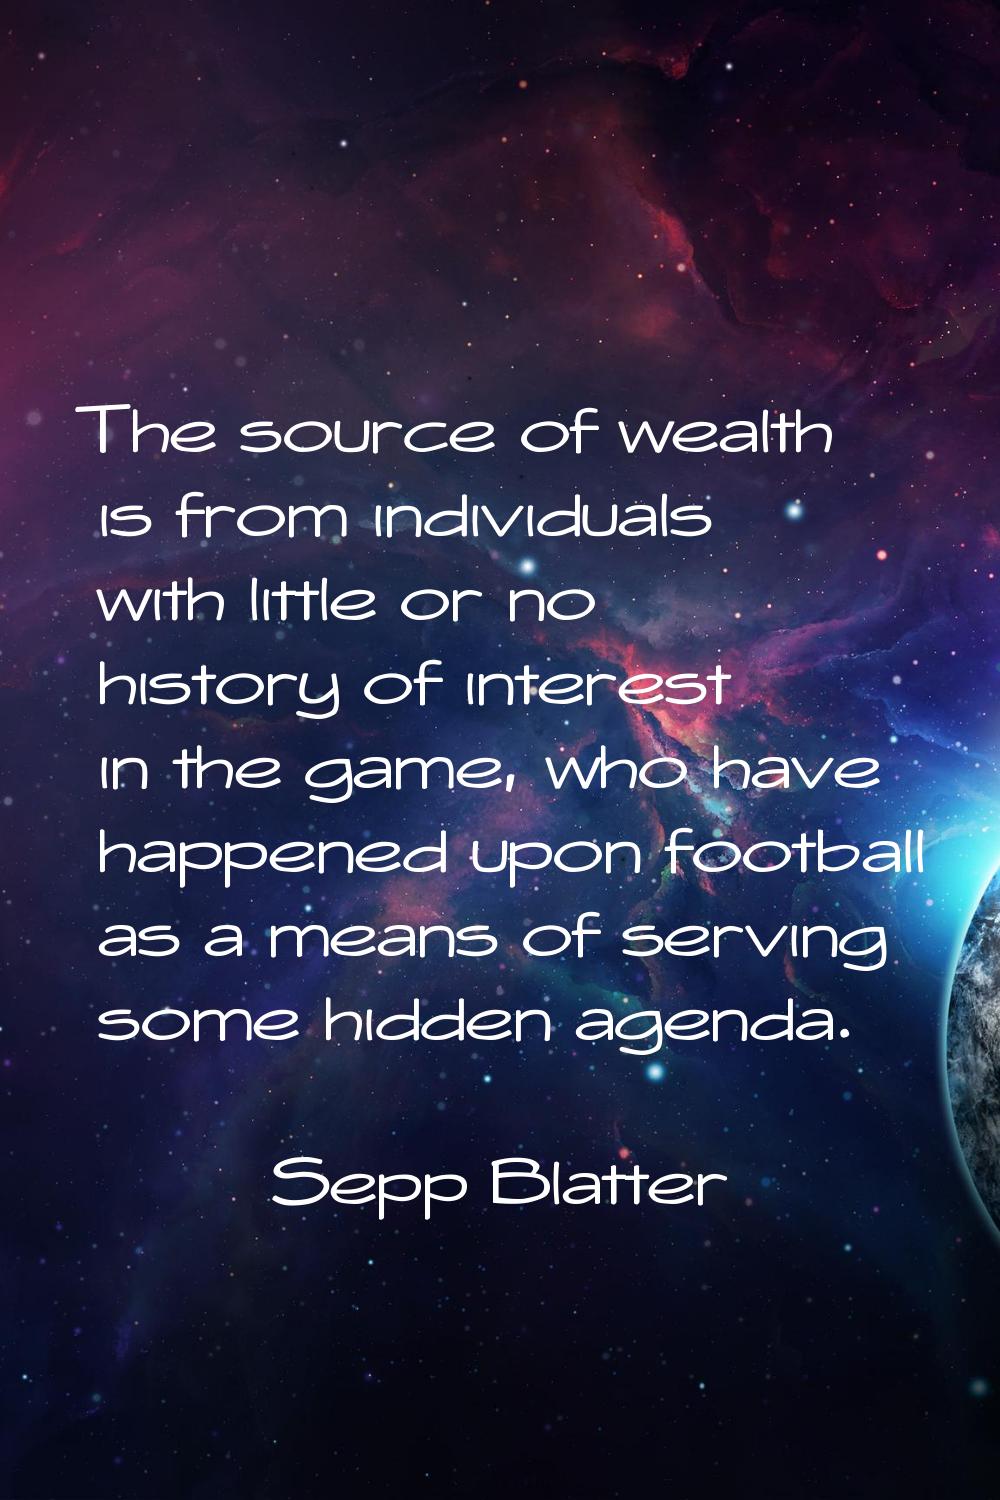 The source of wealth is from individuals with little or no history of interest in the game, who hav